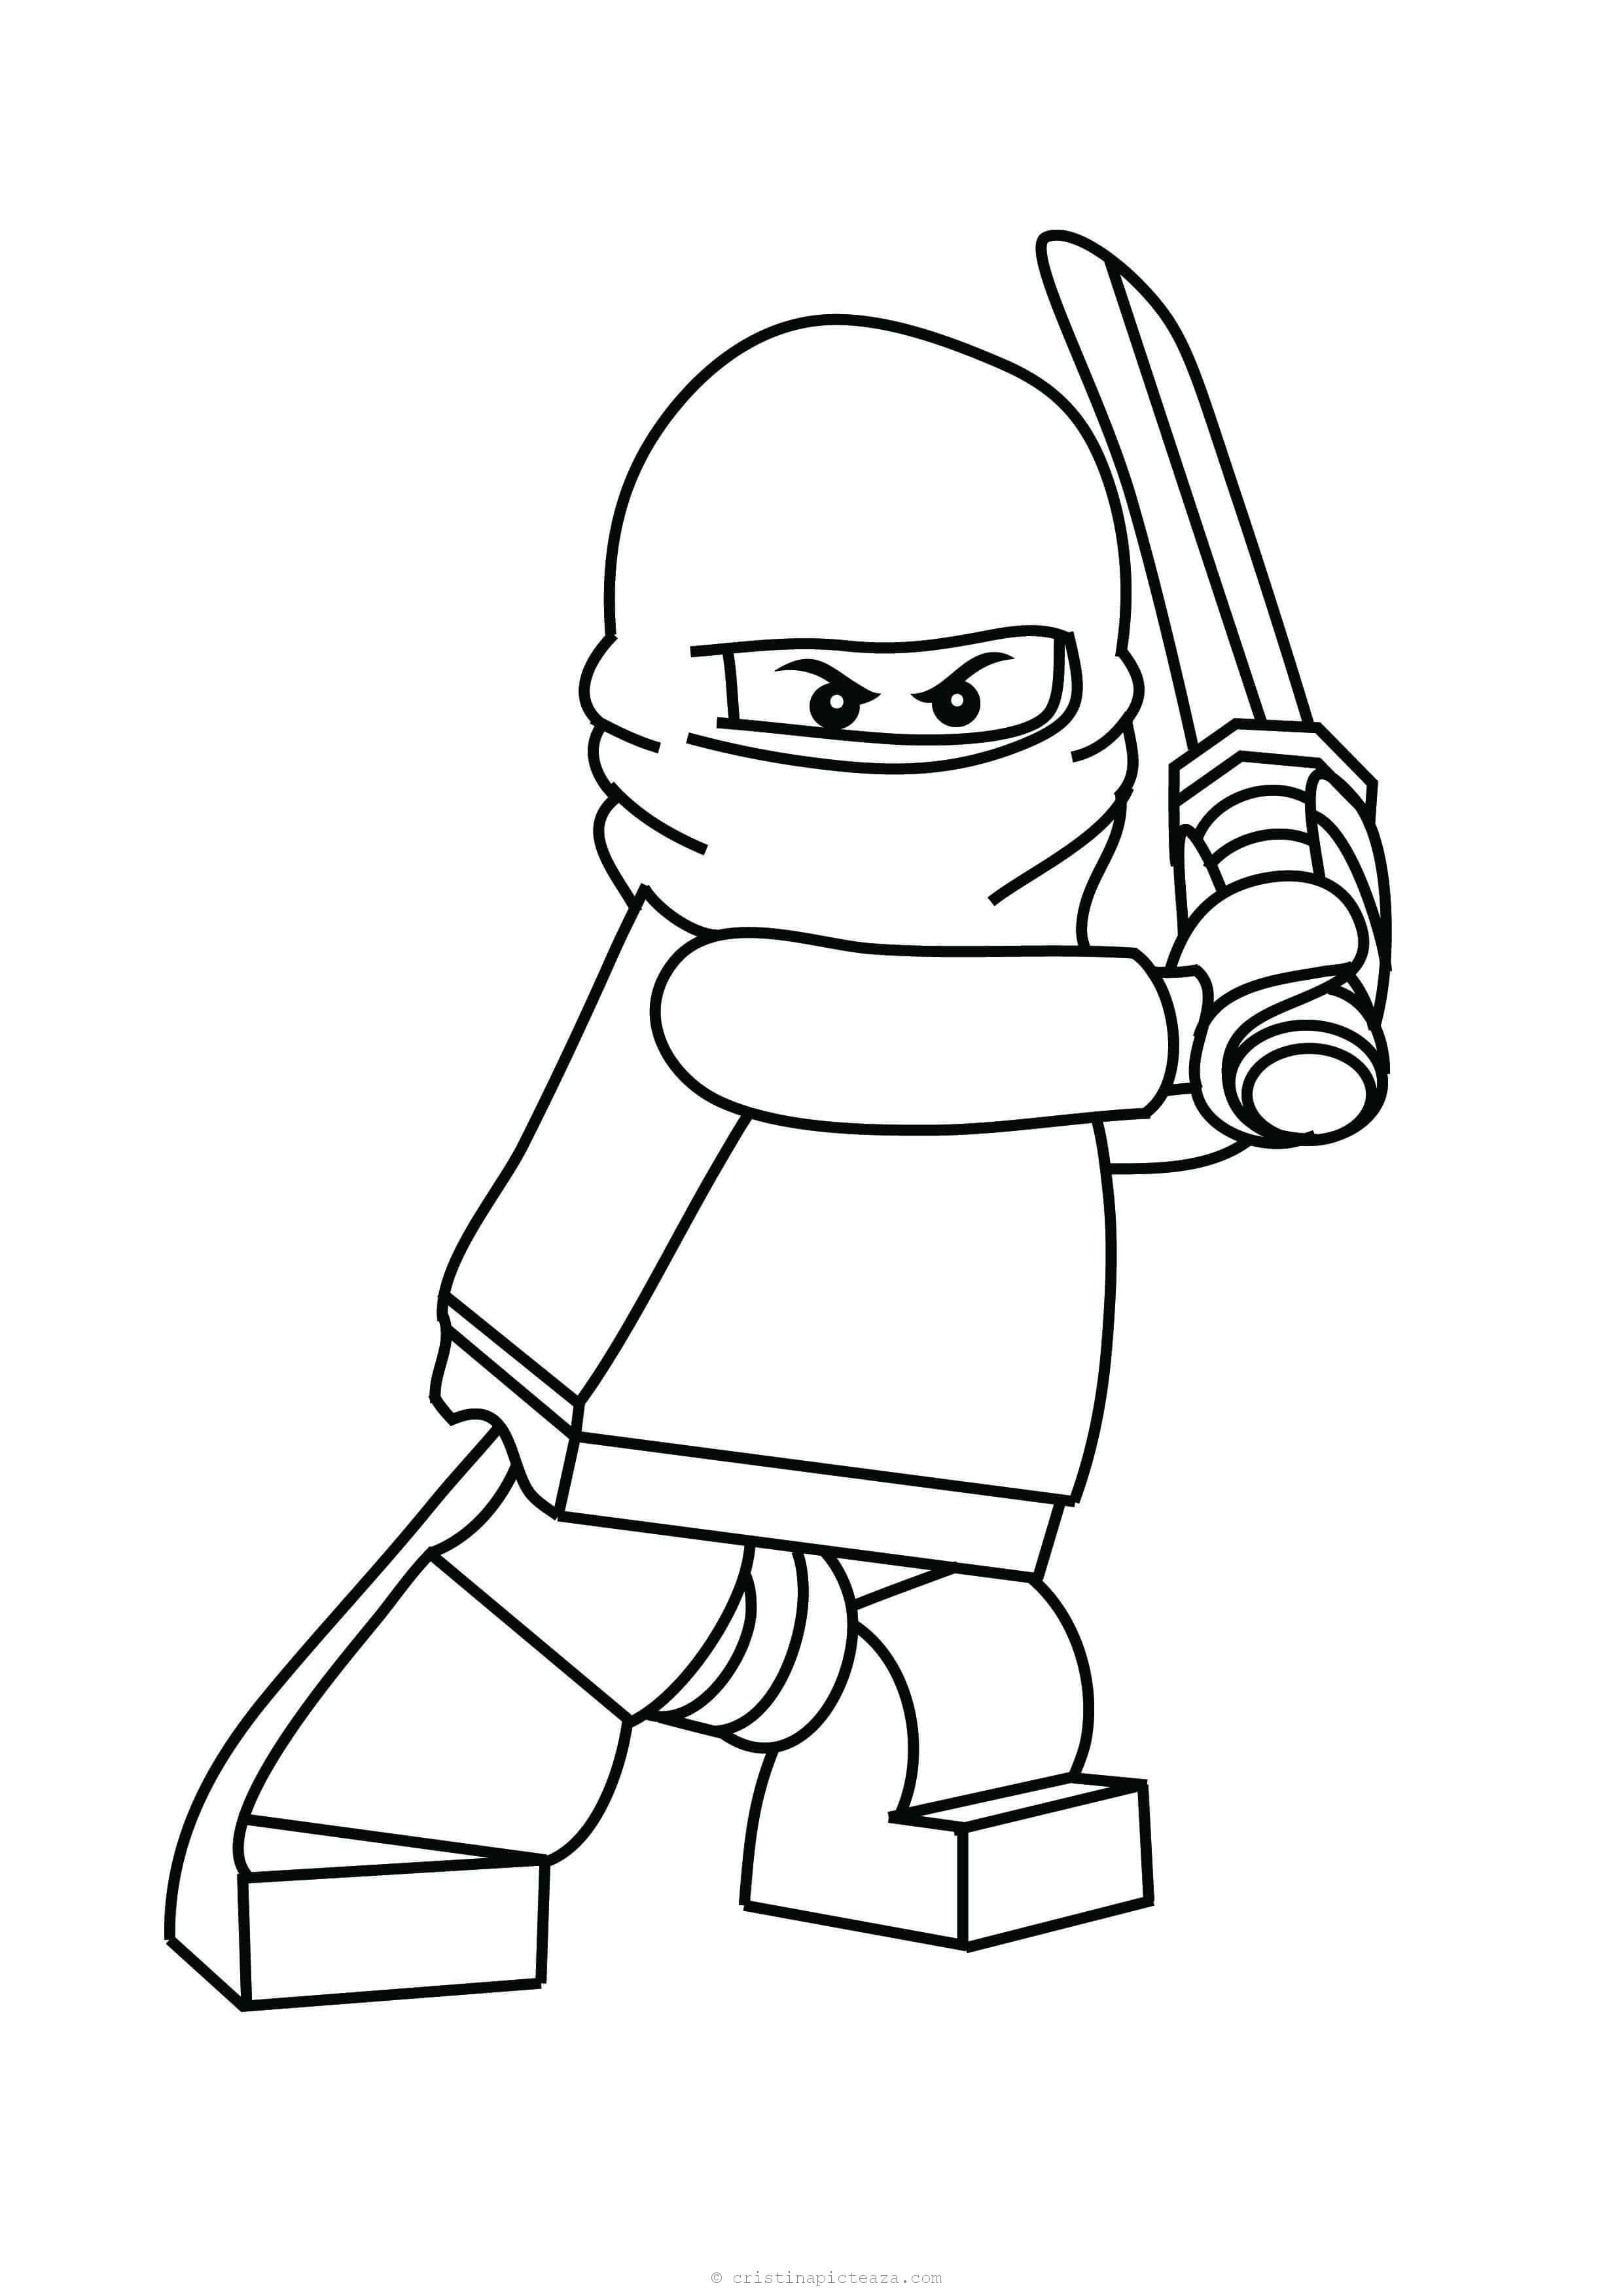 The Movie Lego Coloring Pages – Cristina is Painting